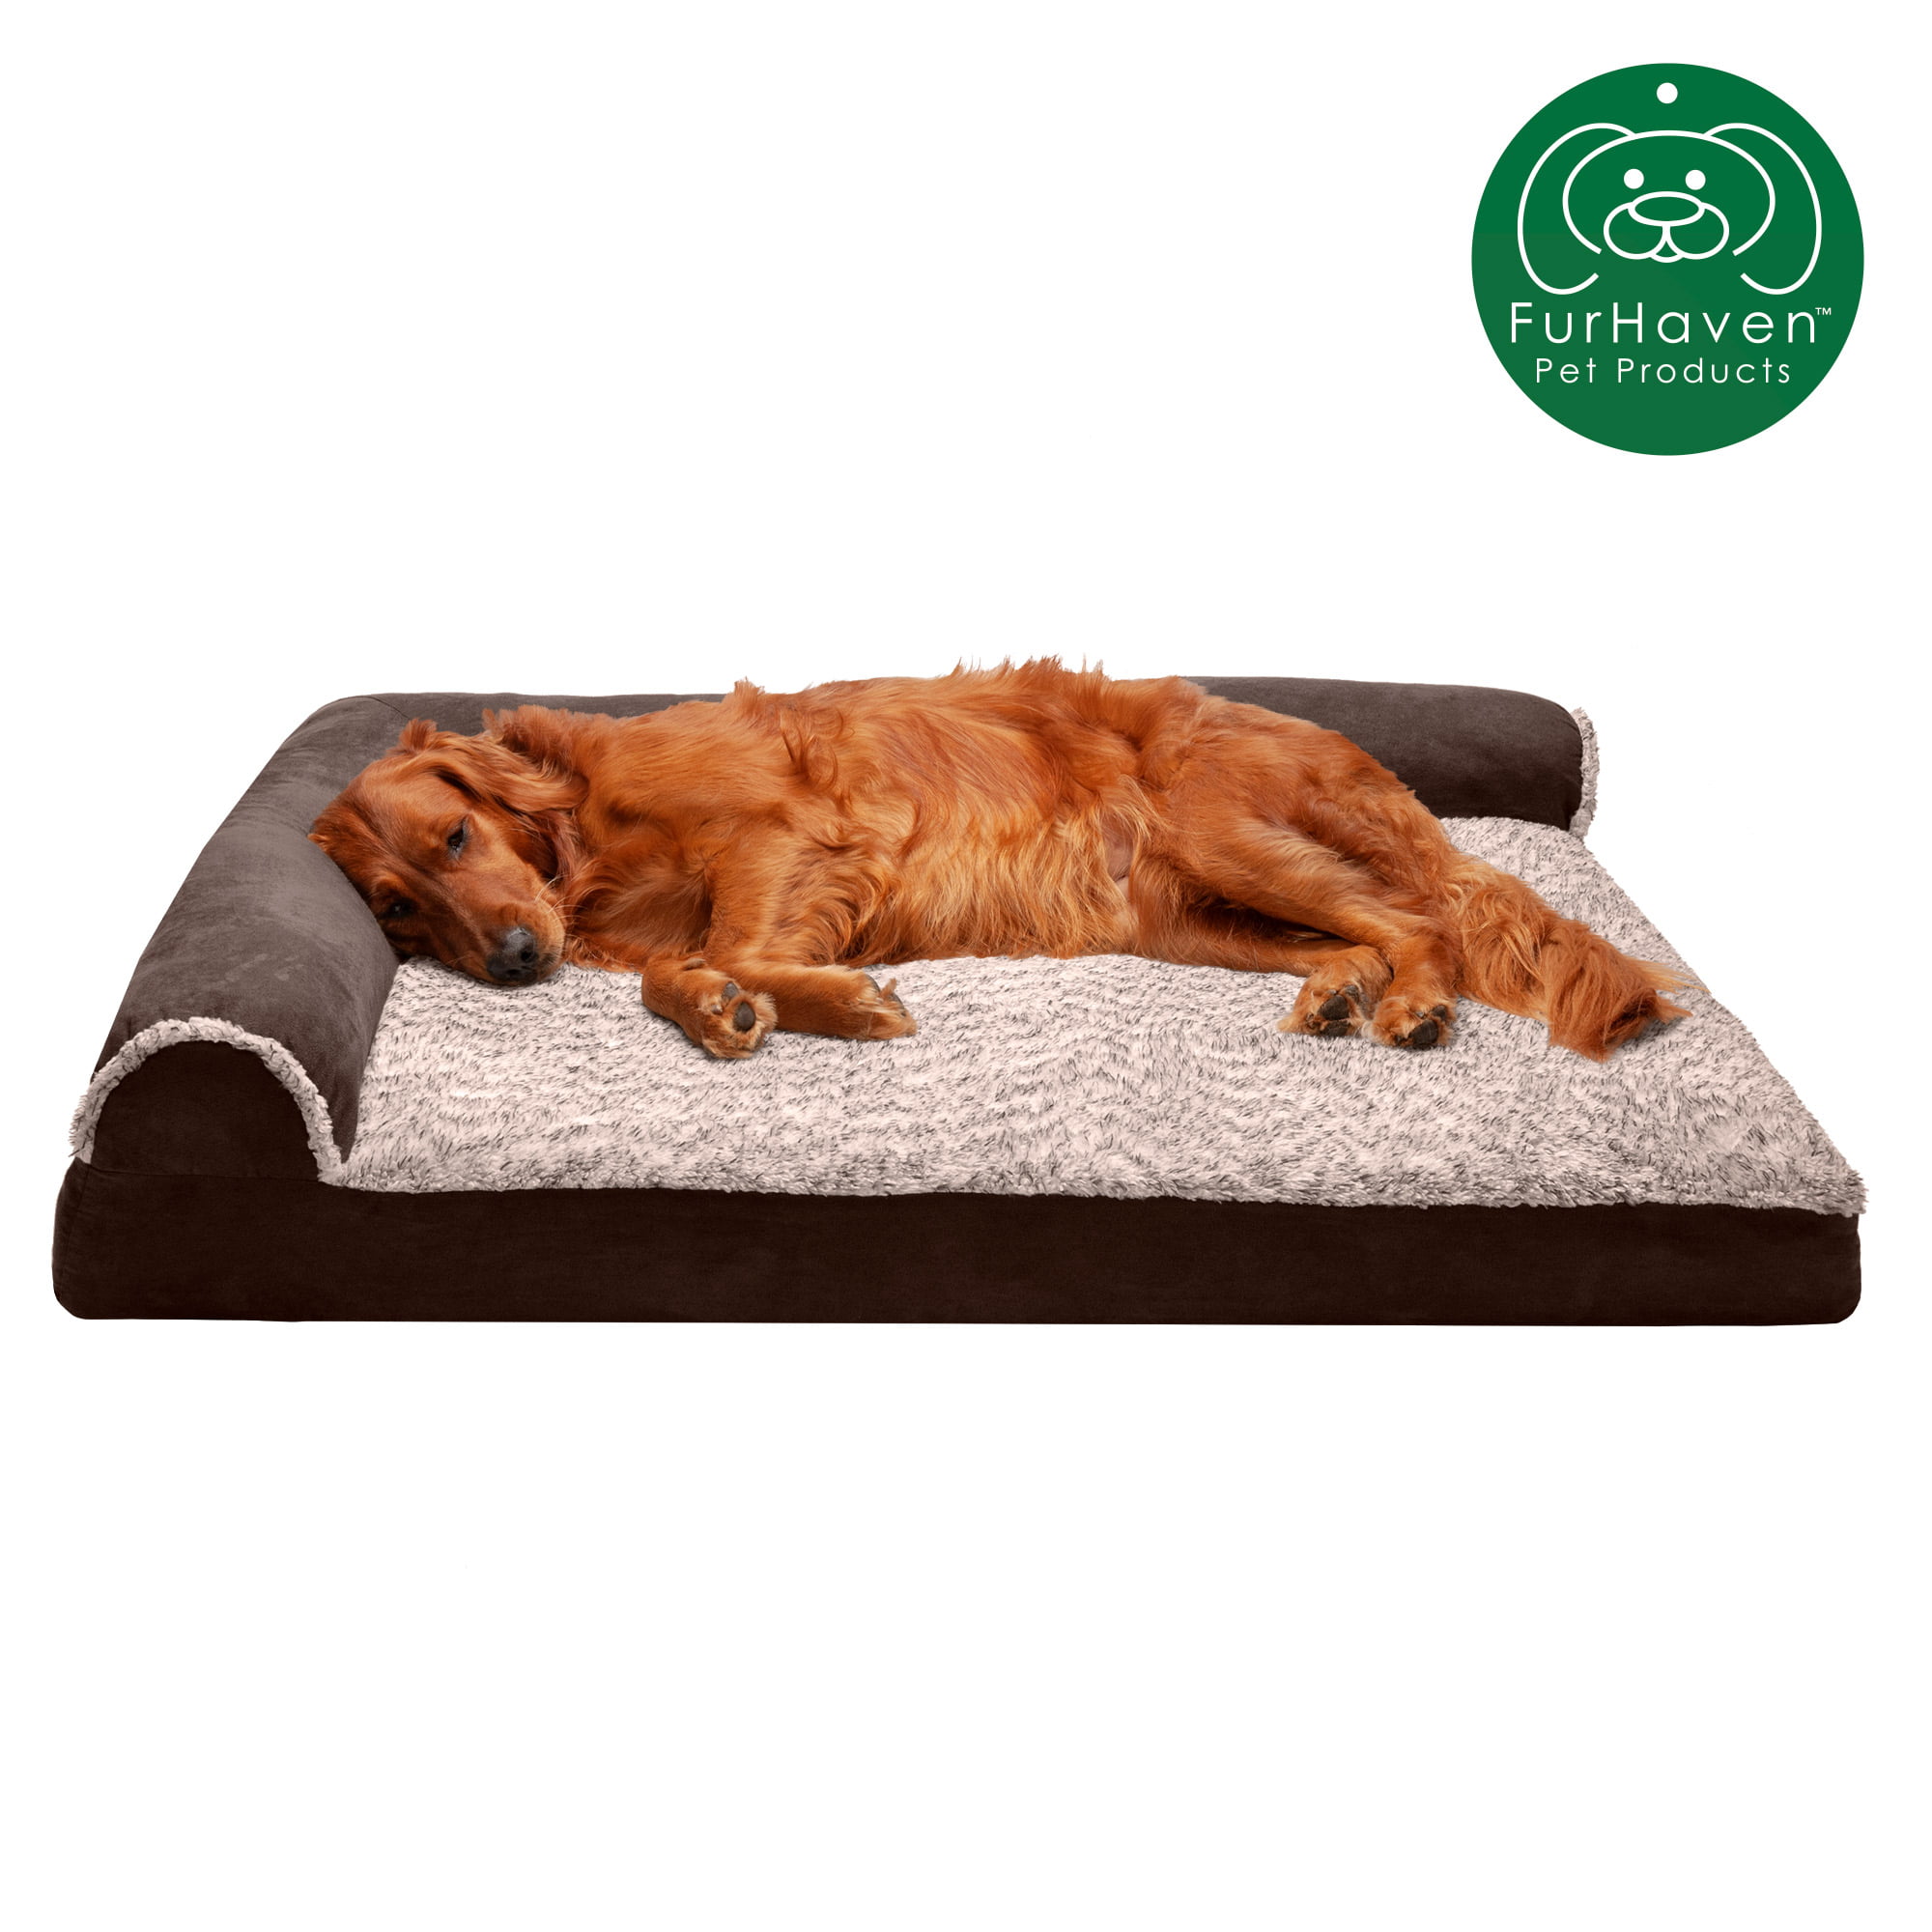 furhaven pet dog bed deluxe memory foam chaise faux fur suede l shaped lounge sofa pet bed for dogs cats espresso jumbo walmart com